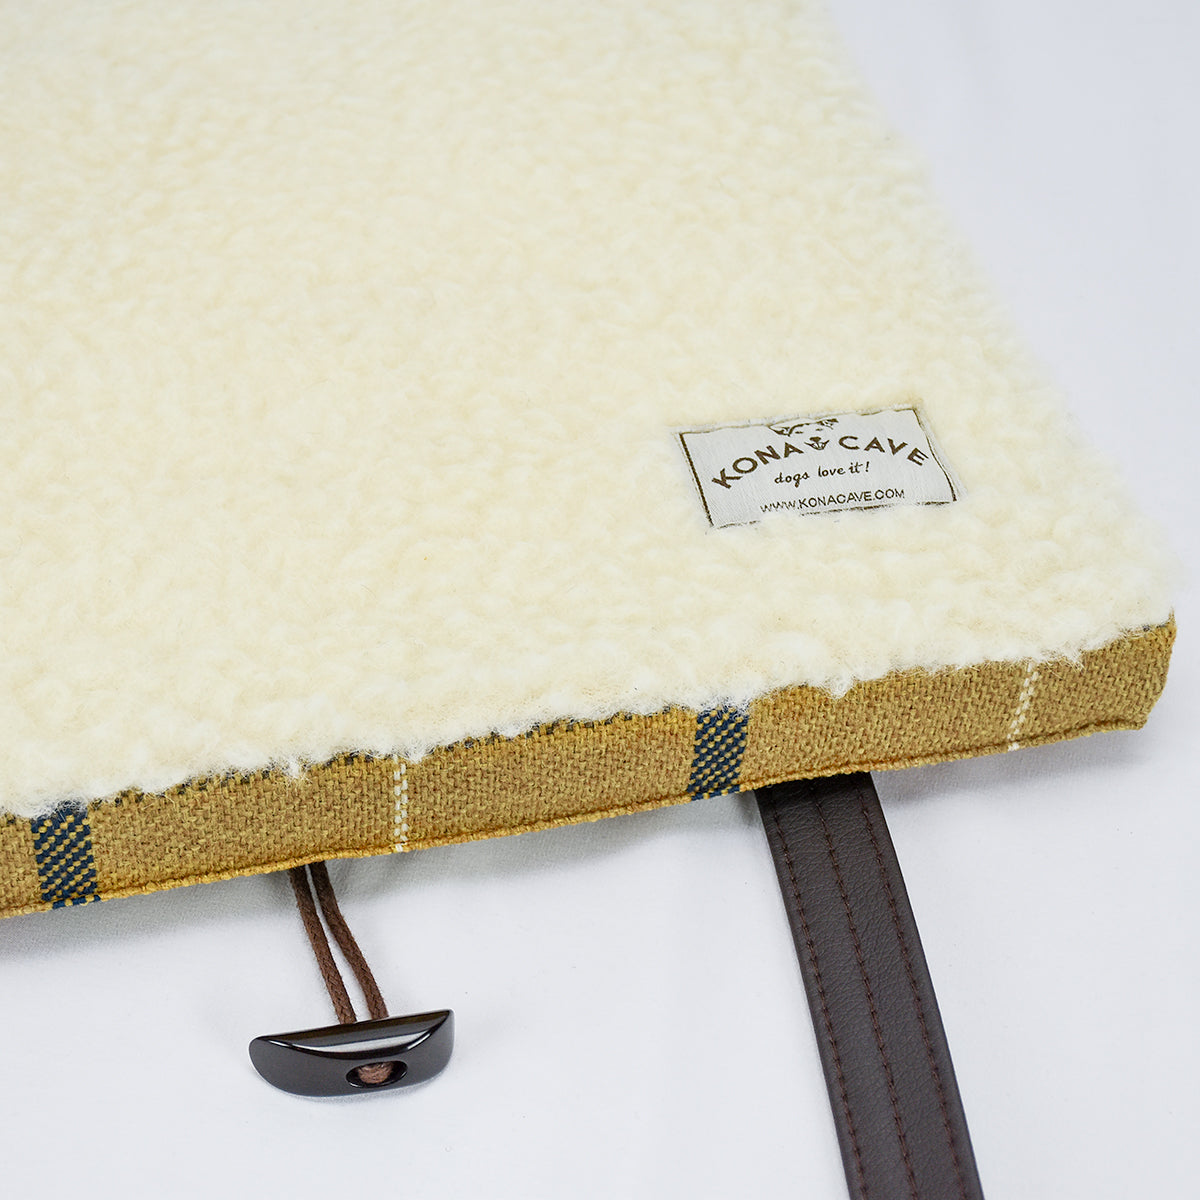 KONA CAVE® Folded Travel Dog Bed for restaurants, cars, pubs and hotels.  100% real shearling wool lining in the inside of the KONA CAVE® Travel Dog Bed in Gold Country Plaid helps regulate temperature